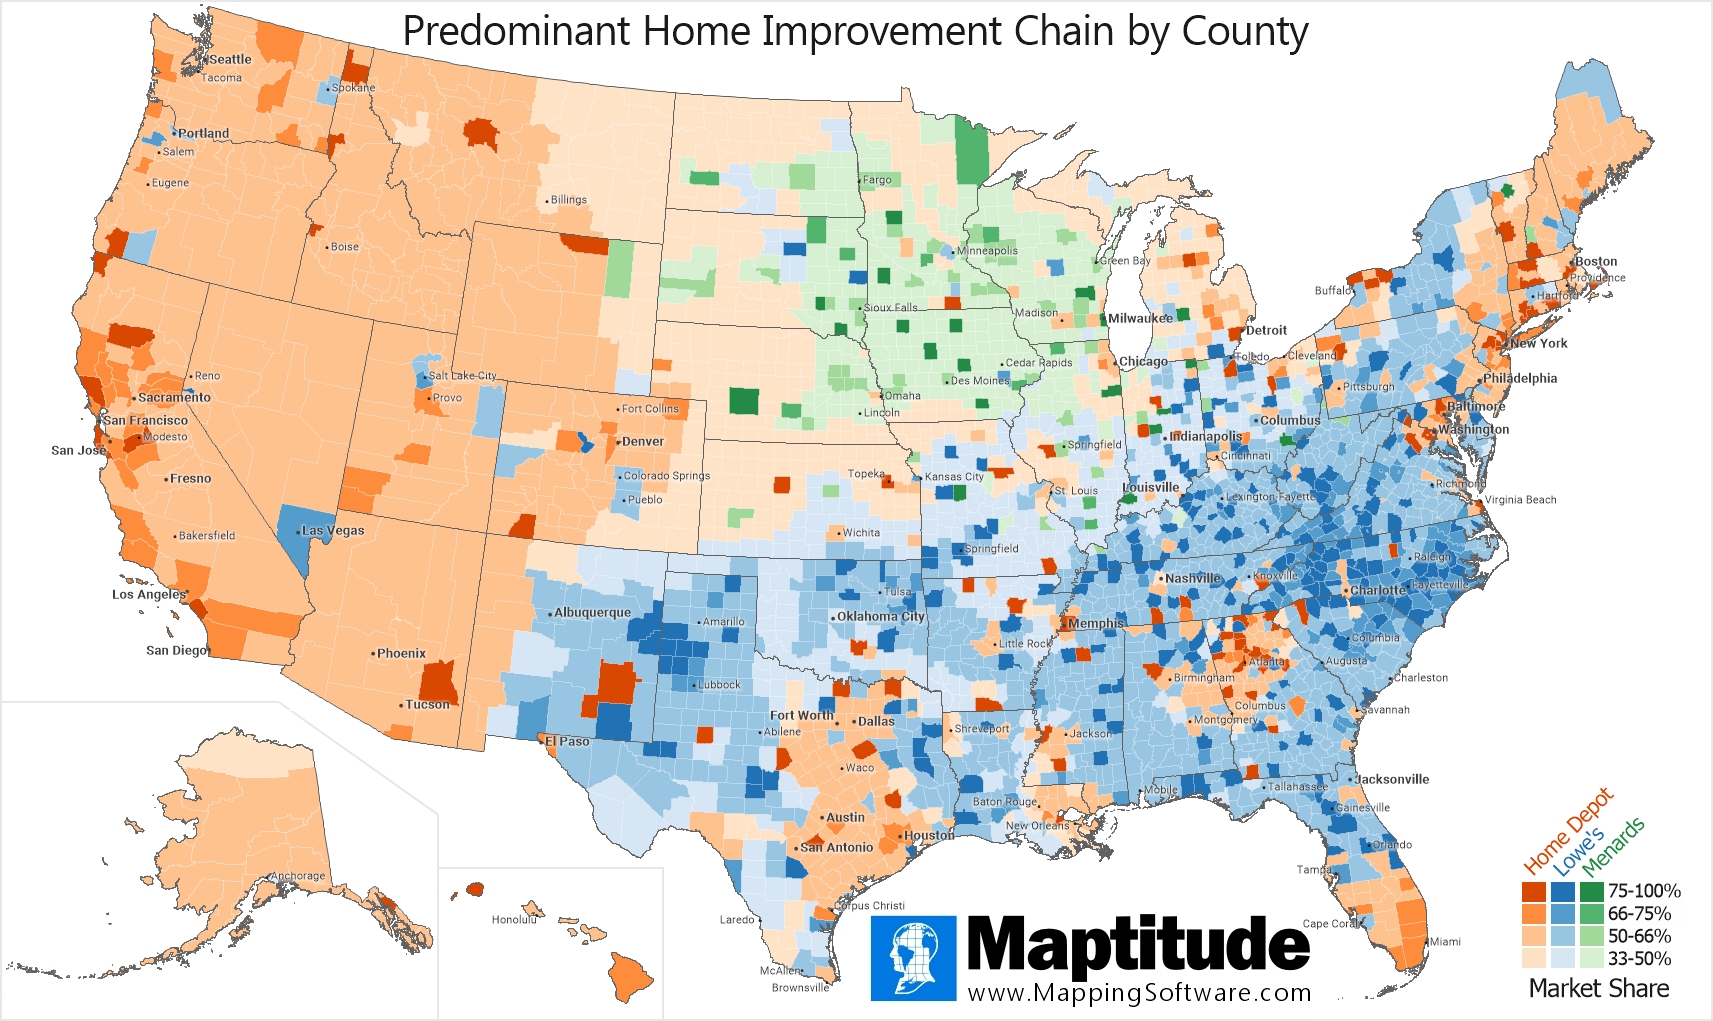 Maptitude mapping software infographic comparing the brand market share of Home Depot, Lowe's, and Menards by U.S. county